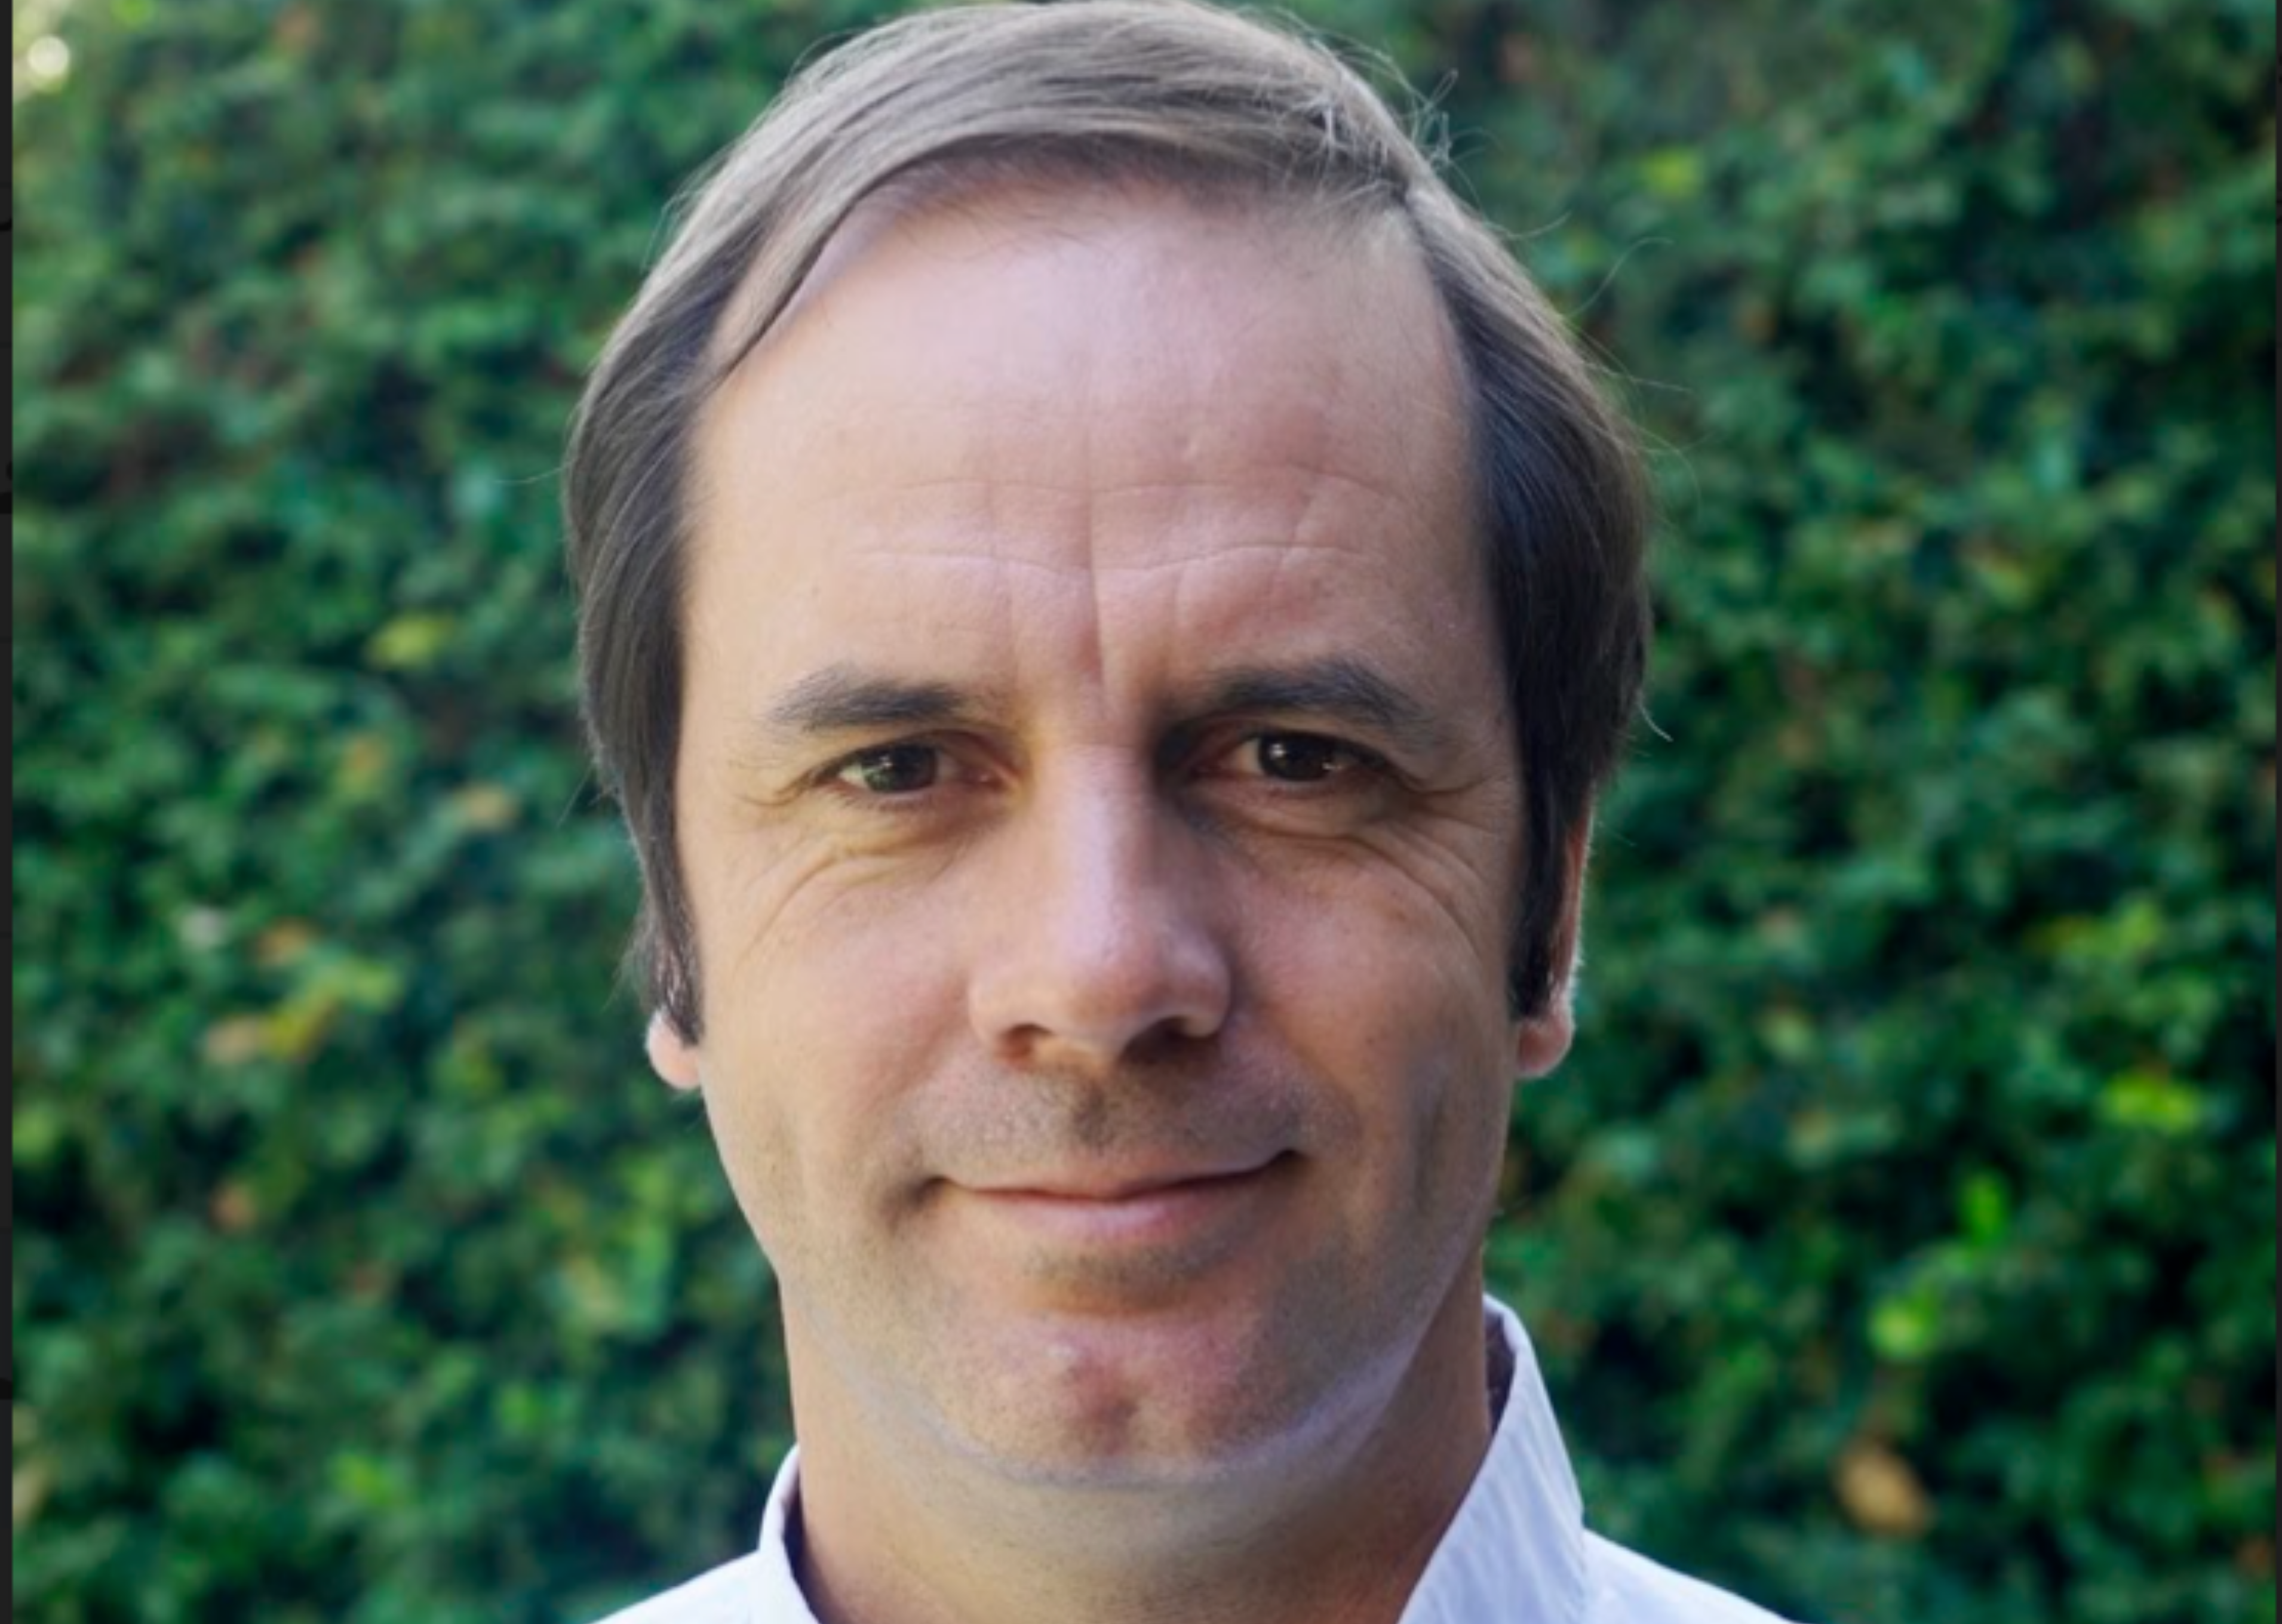 Tomás Barros, General Manager of EVoting